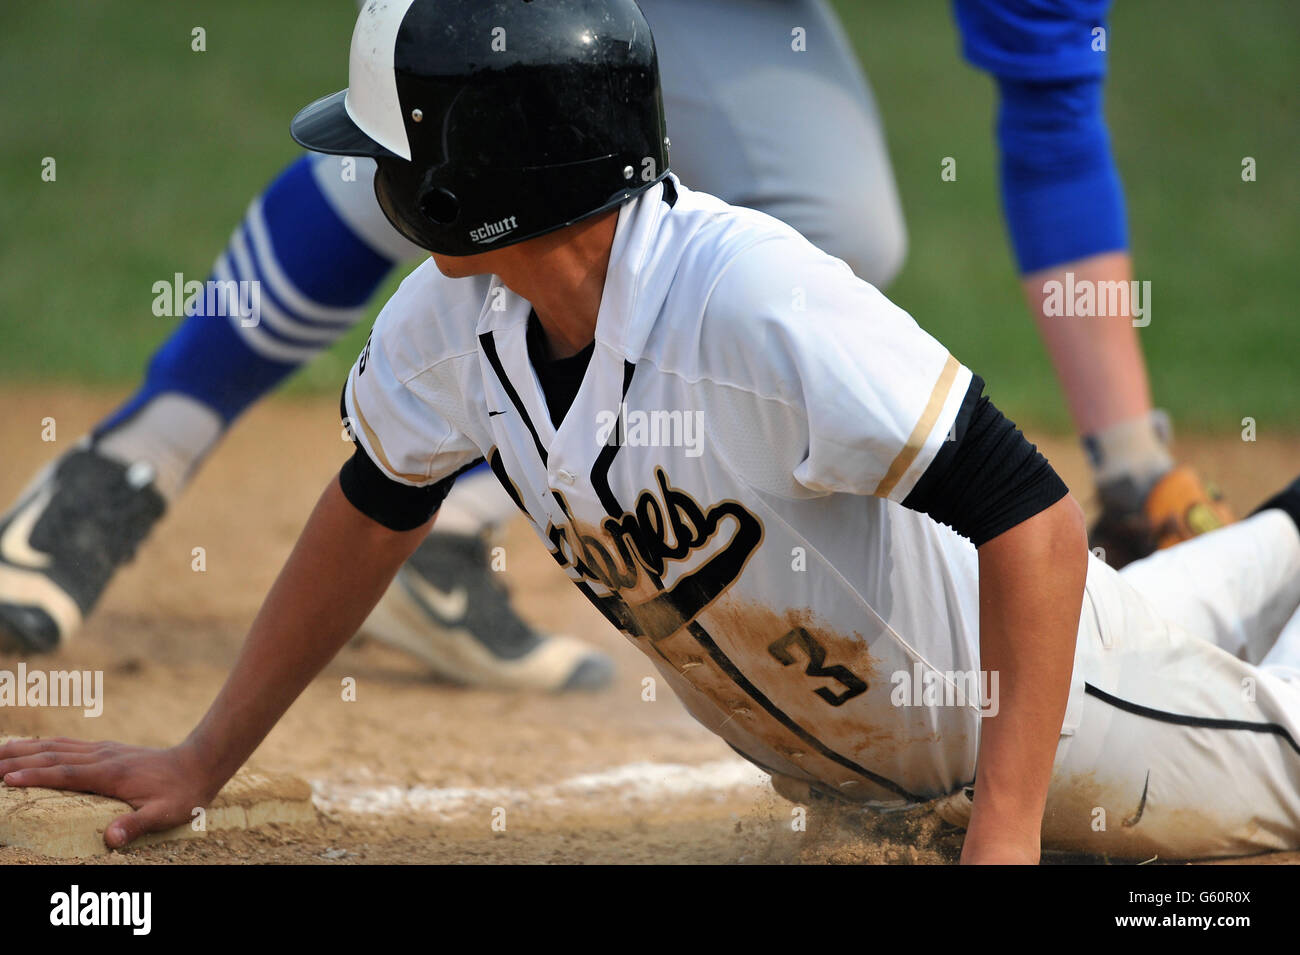 High school player diving head first safely into third base during an attempted pick-off play. USA. Stock Photo